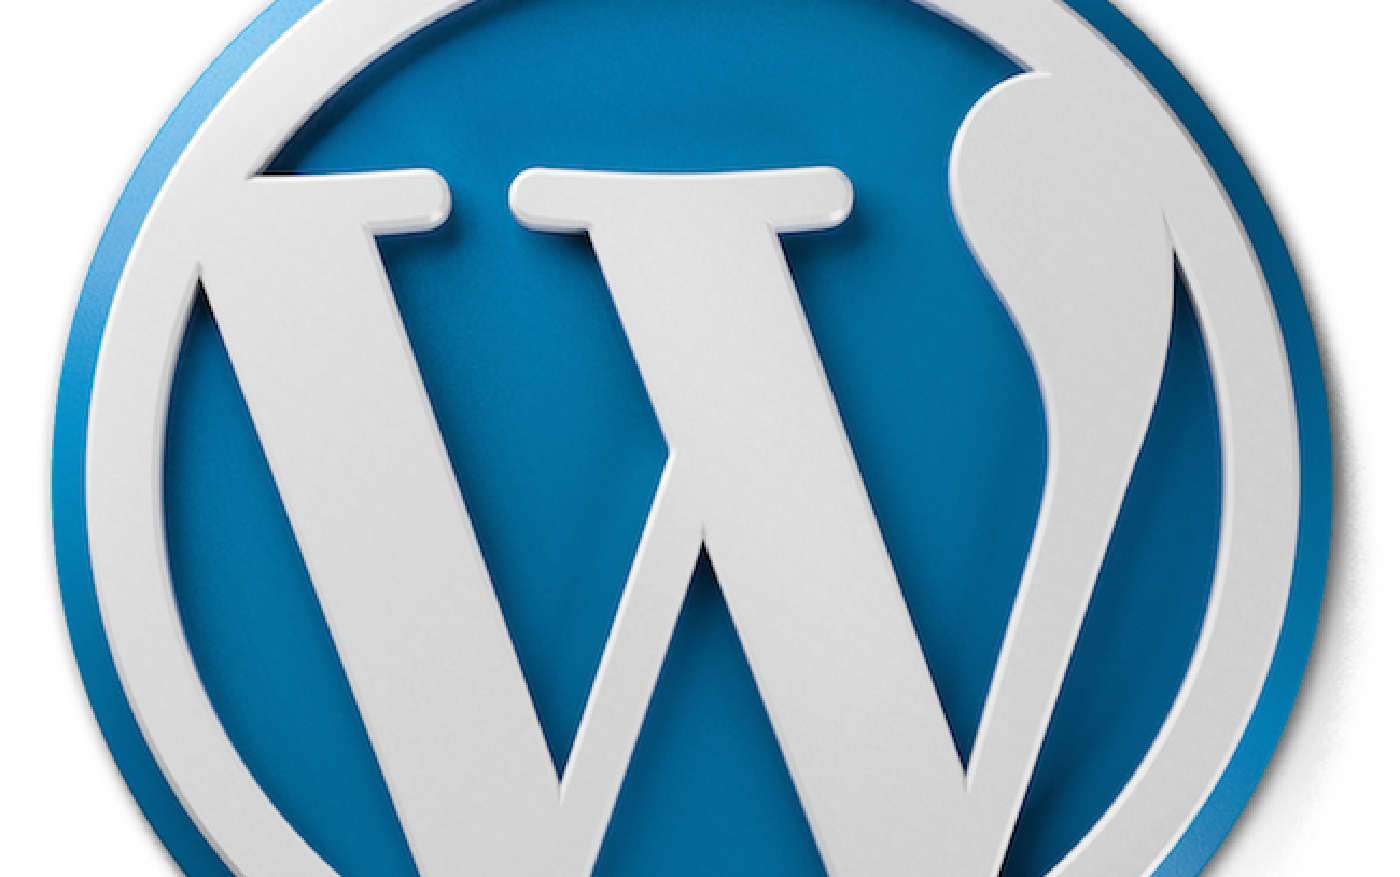 How to Deploy Wordpress without Murderous Rage